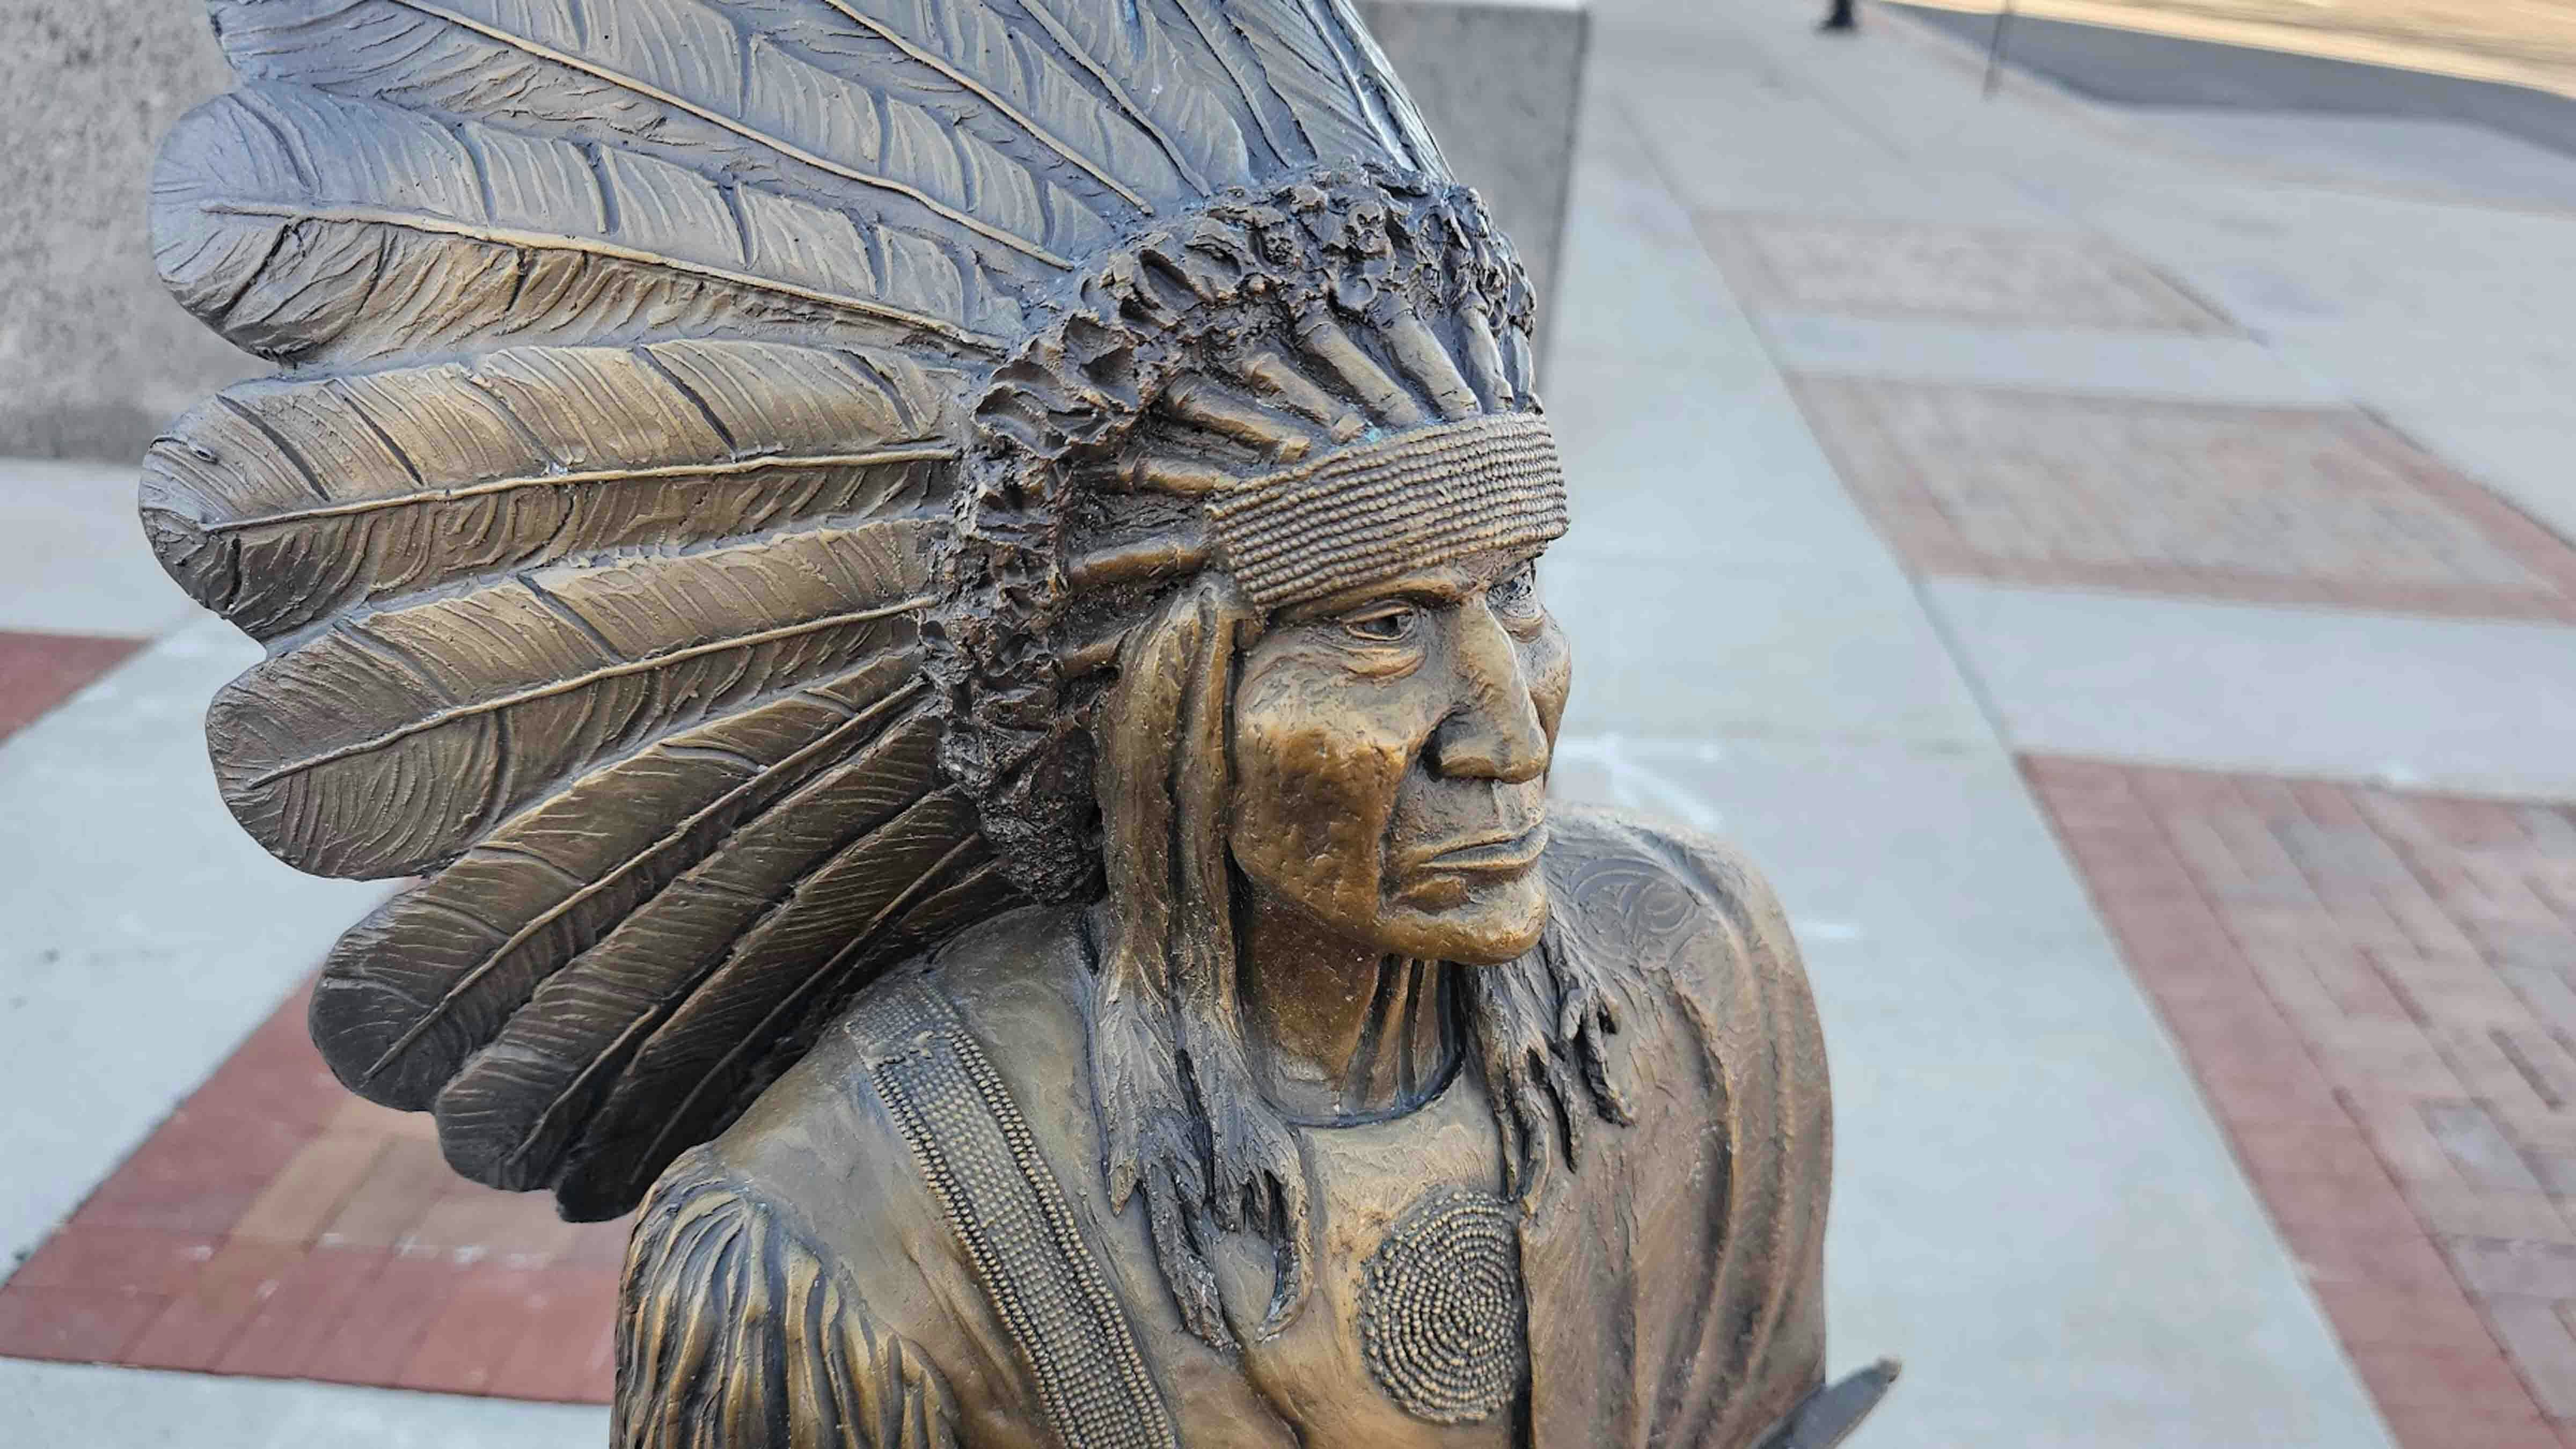 Chief Yellowcalf was the last chief of the Northern Arapaho Tribe. His statue is located on the southwest corner of Capitol Avenue and 19th Street. Tanner Loren was the sculptor and the donor ANB bank